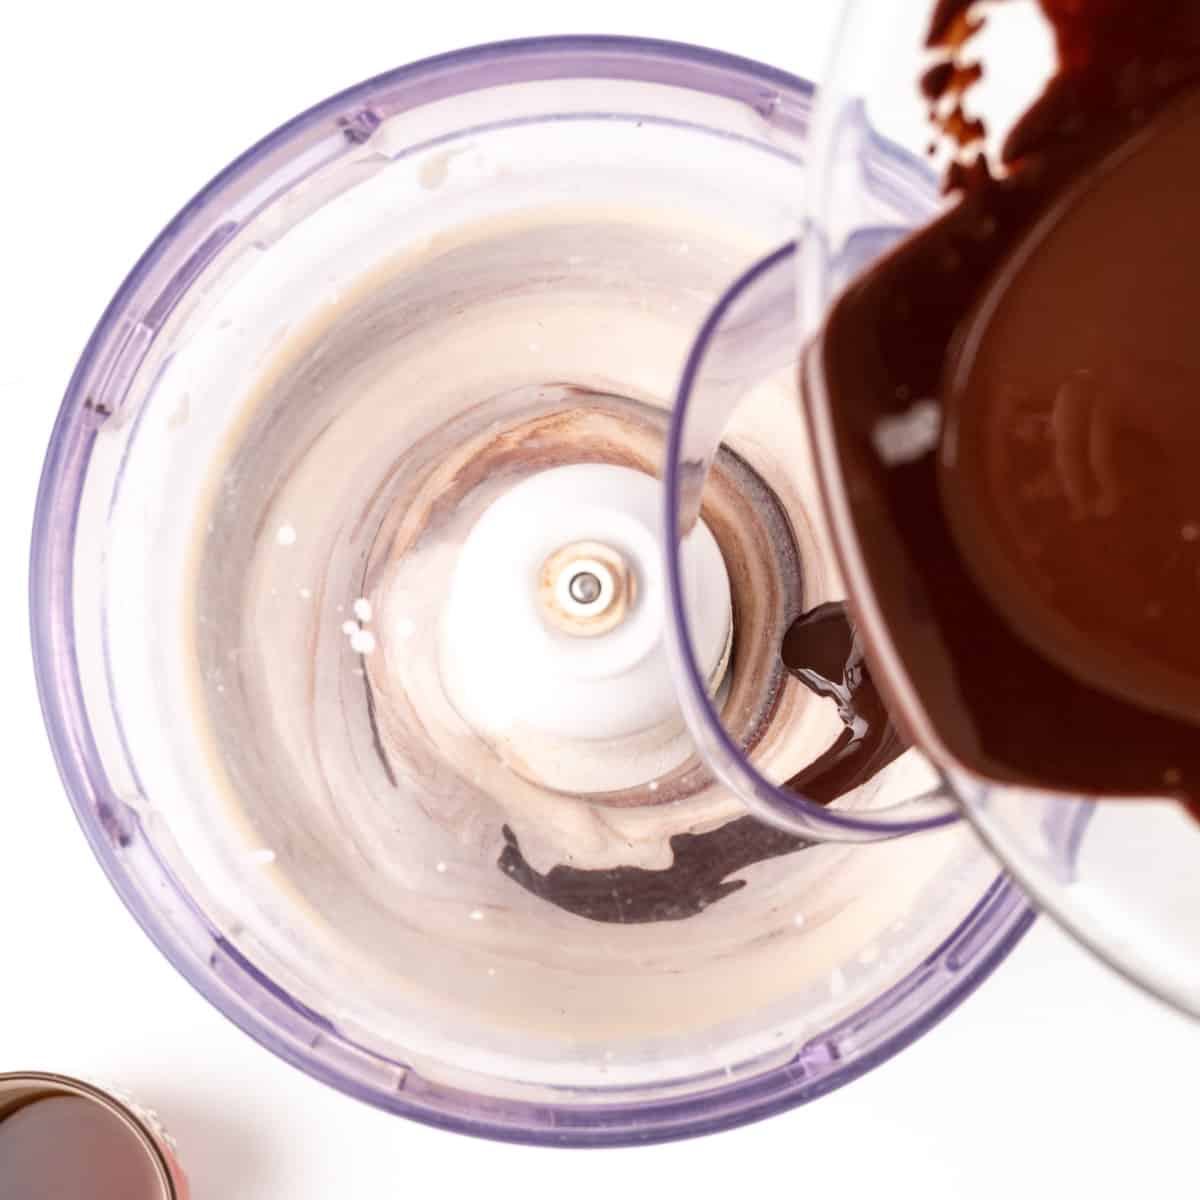 Pouring melted chocolate into a food processor with silken tofu in.